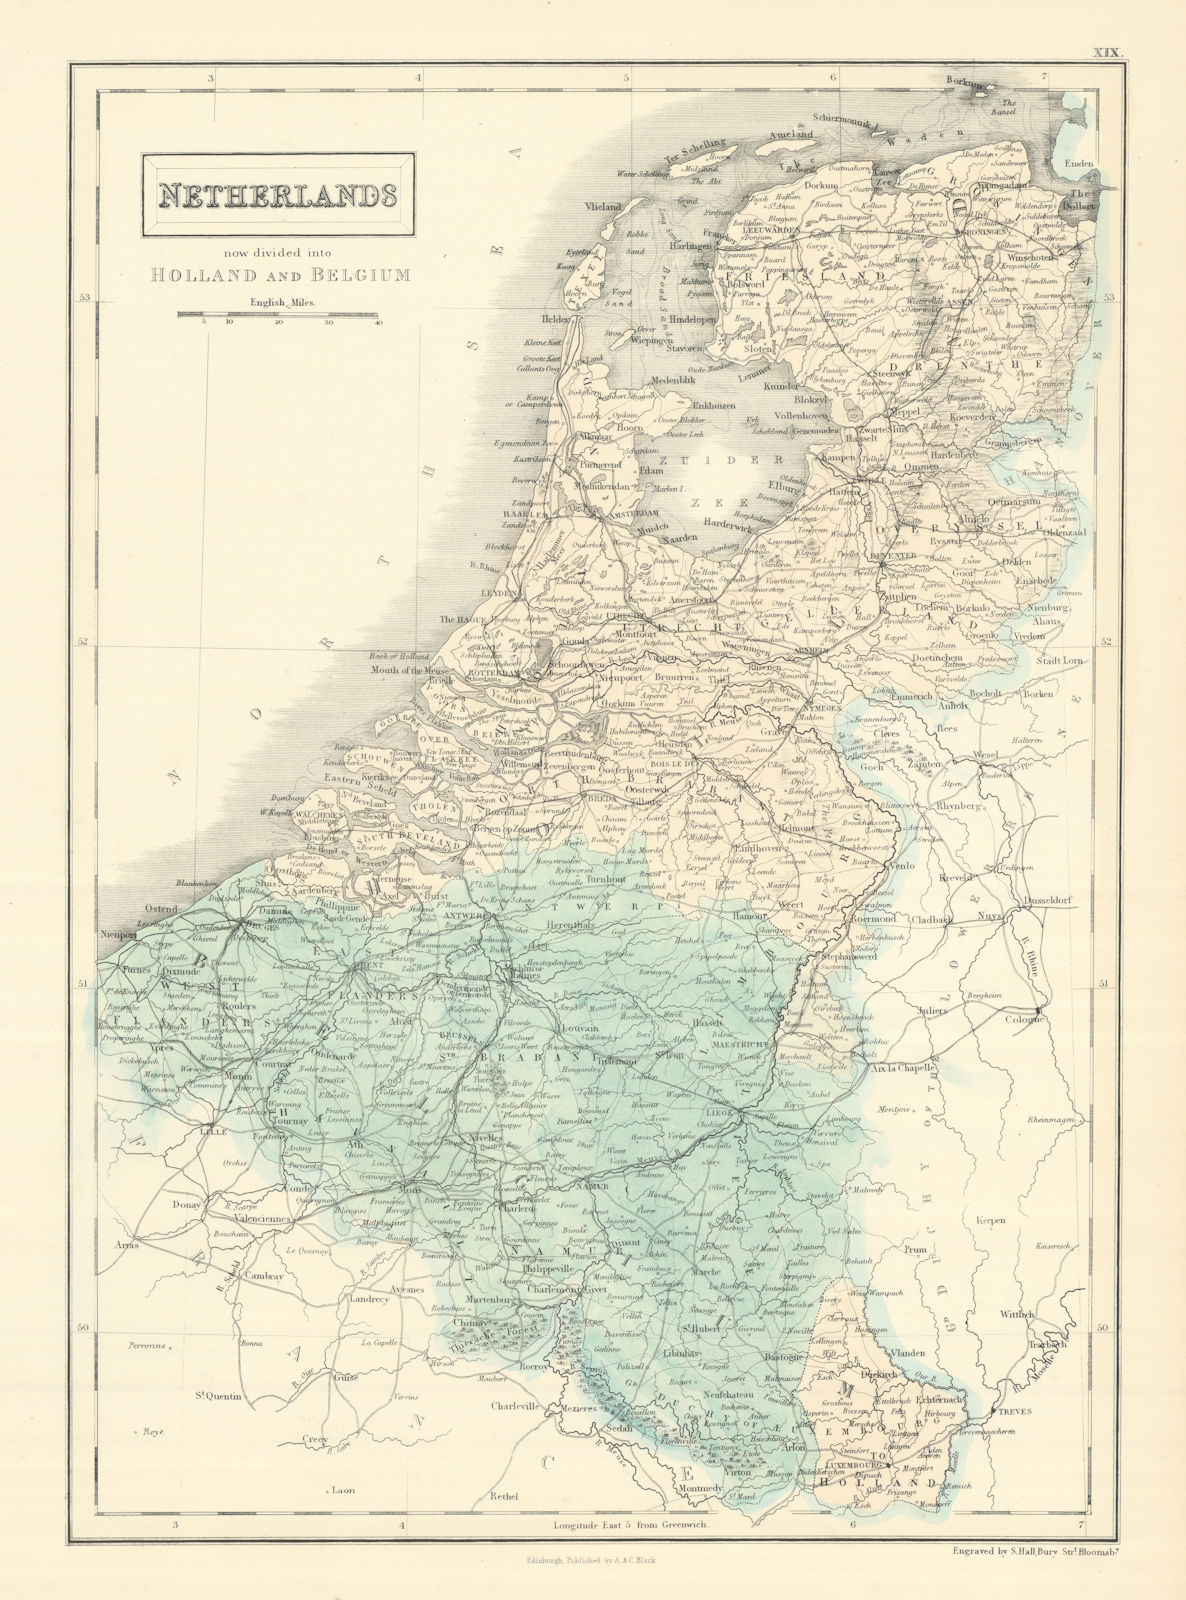 "Netherlands, now divided into Holland & Belgium". Benelux. SIDNEY HALL 1854 map